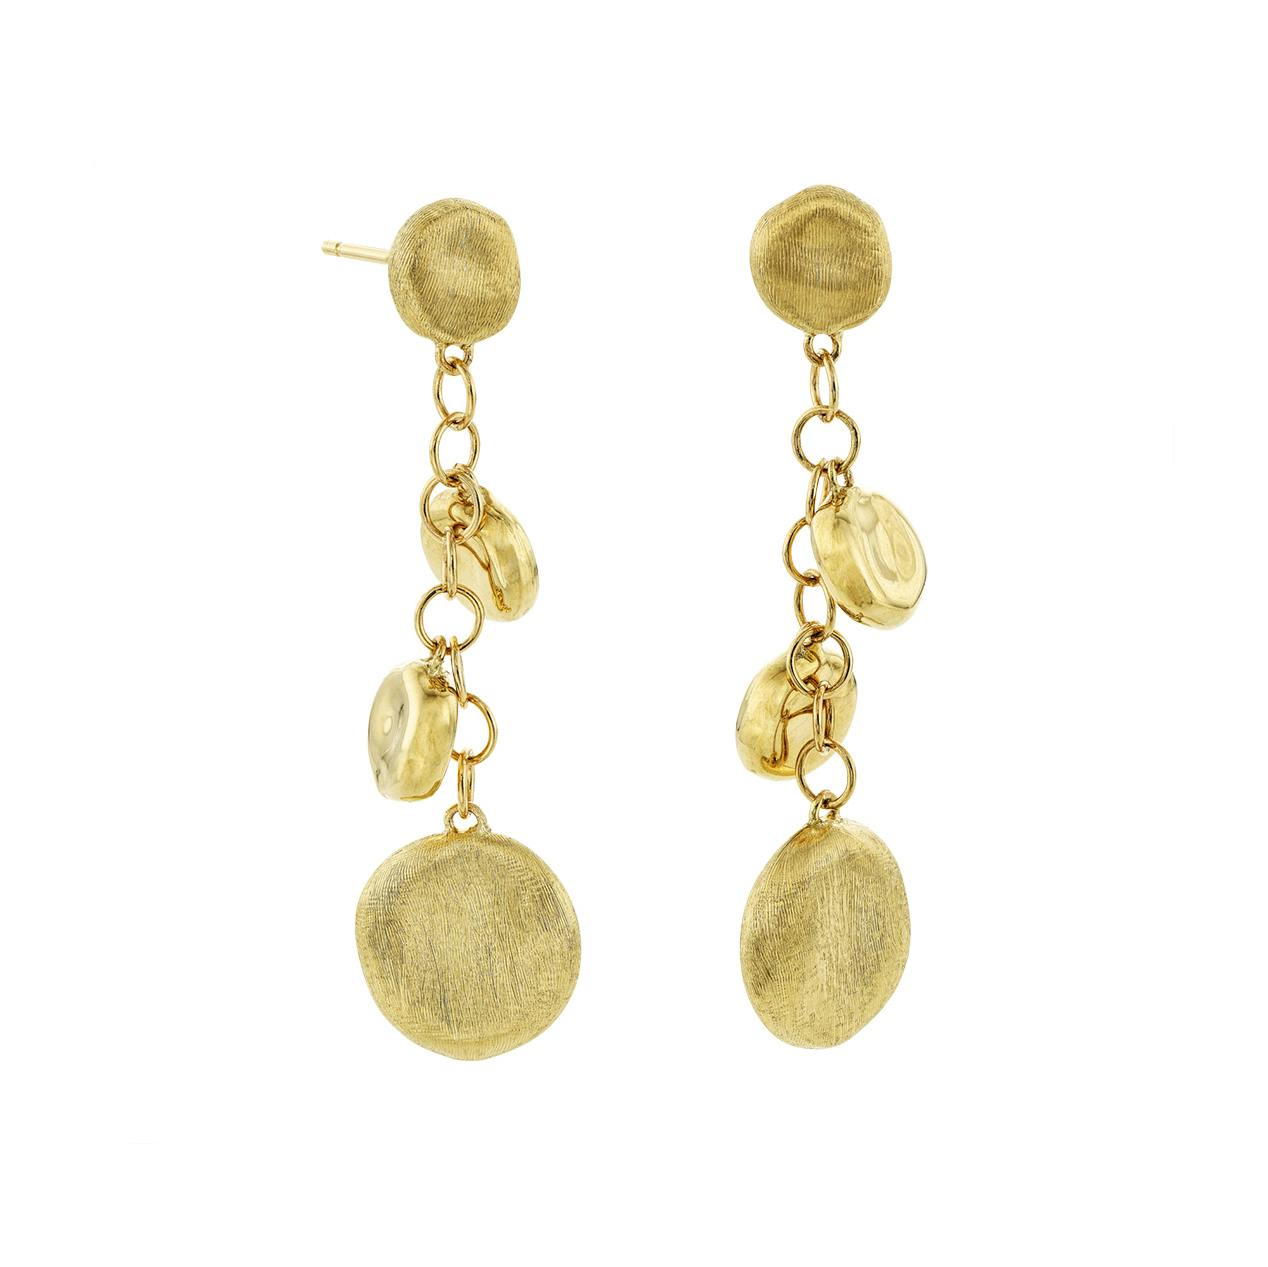 Marco Bicego Jaipur Collection 18K Yellow Gold Engraved and Polished Charm Drop Earrings 0